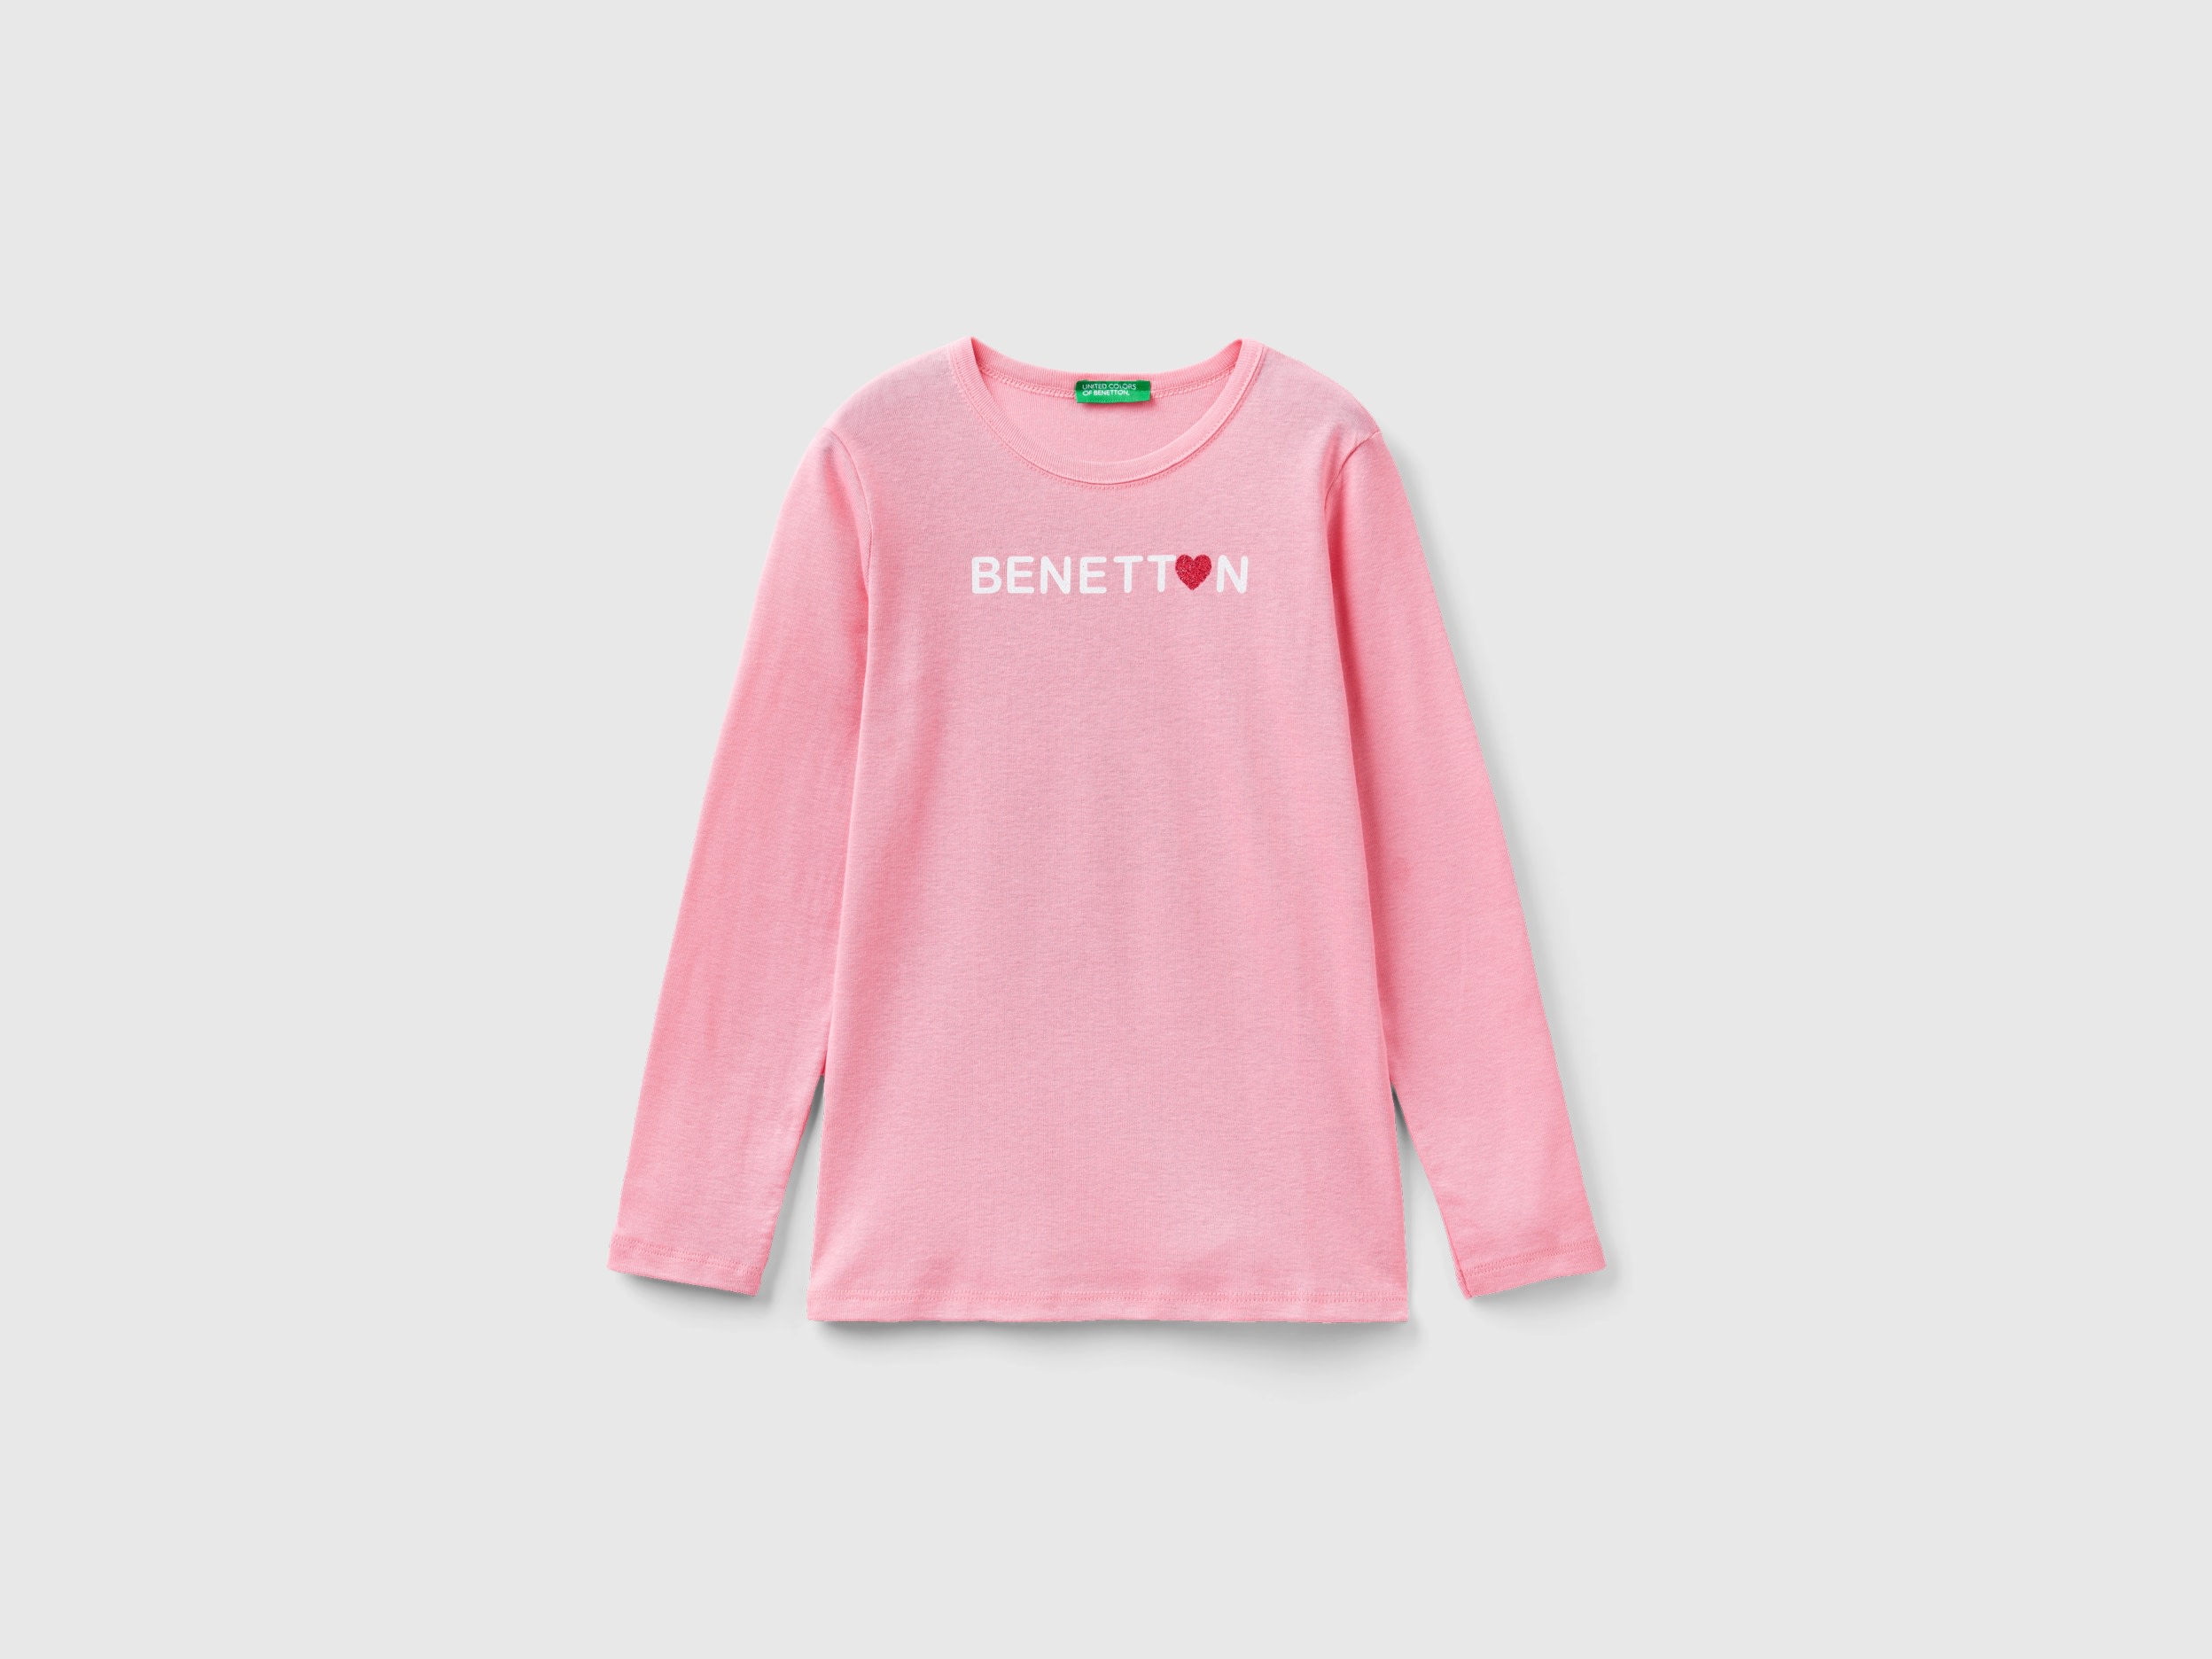 Image of Benetton, Long Sleeve T-shirt With Glitter Print, size M, Pink, Kids